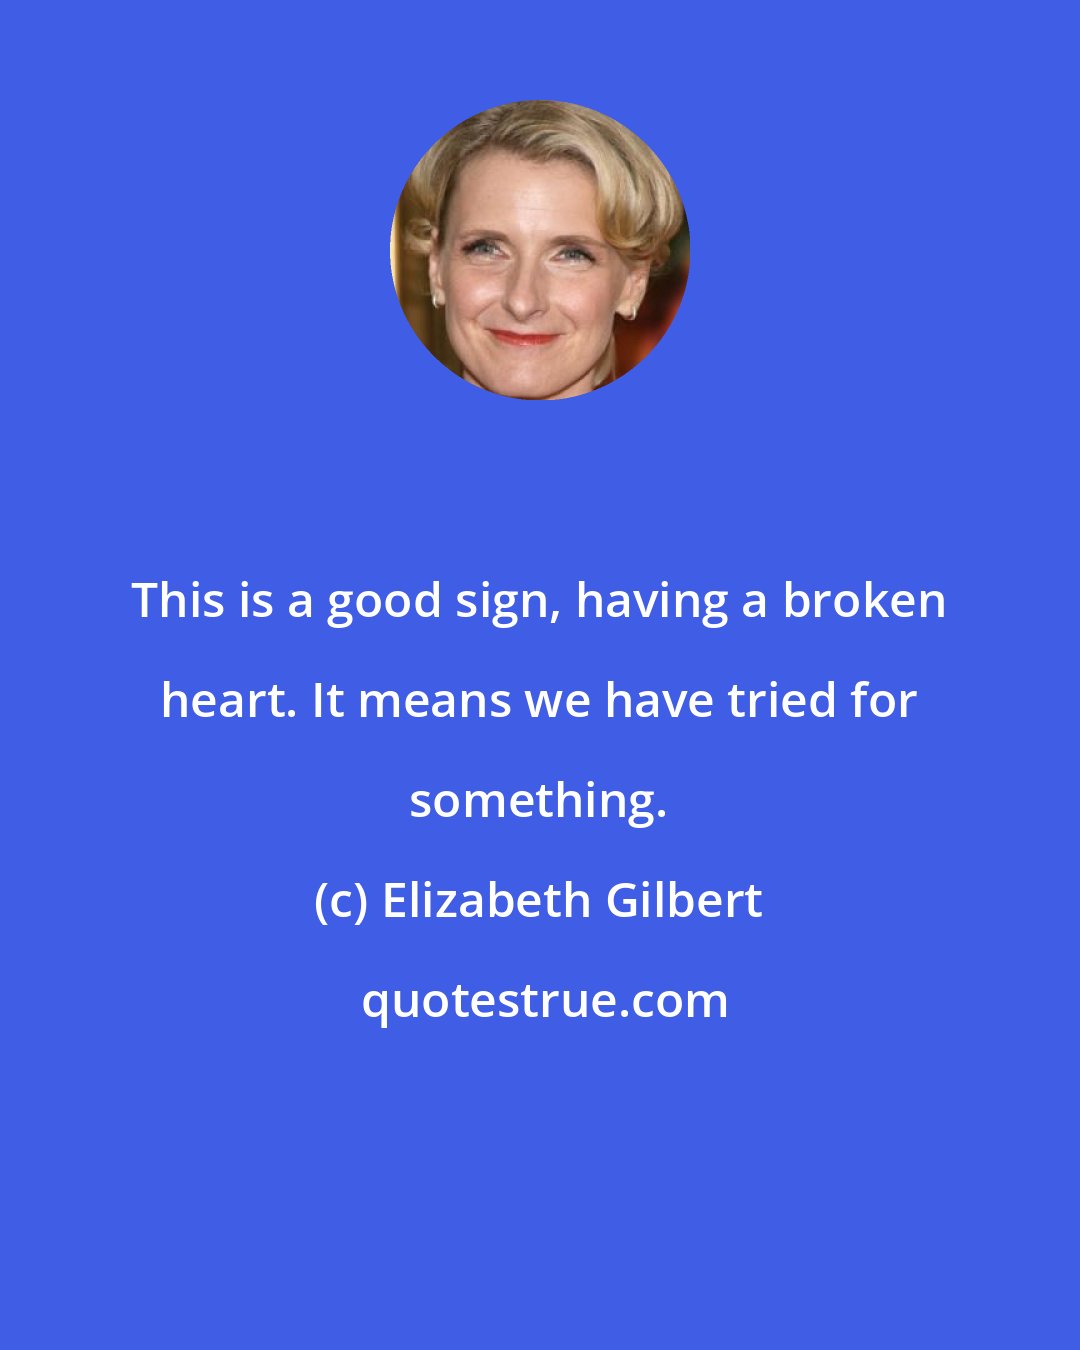 Elizabeth Gilbert: This is a good sign, having a broken heart. It means we have tried for something.